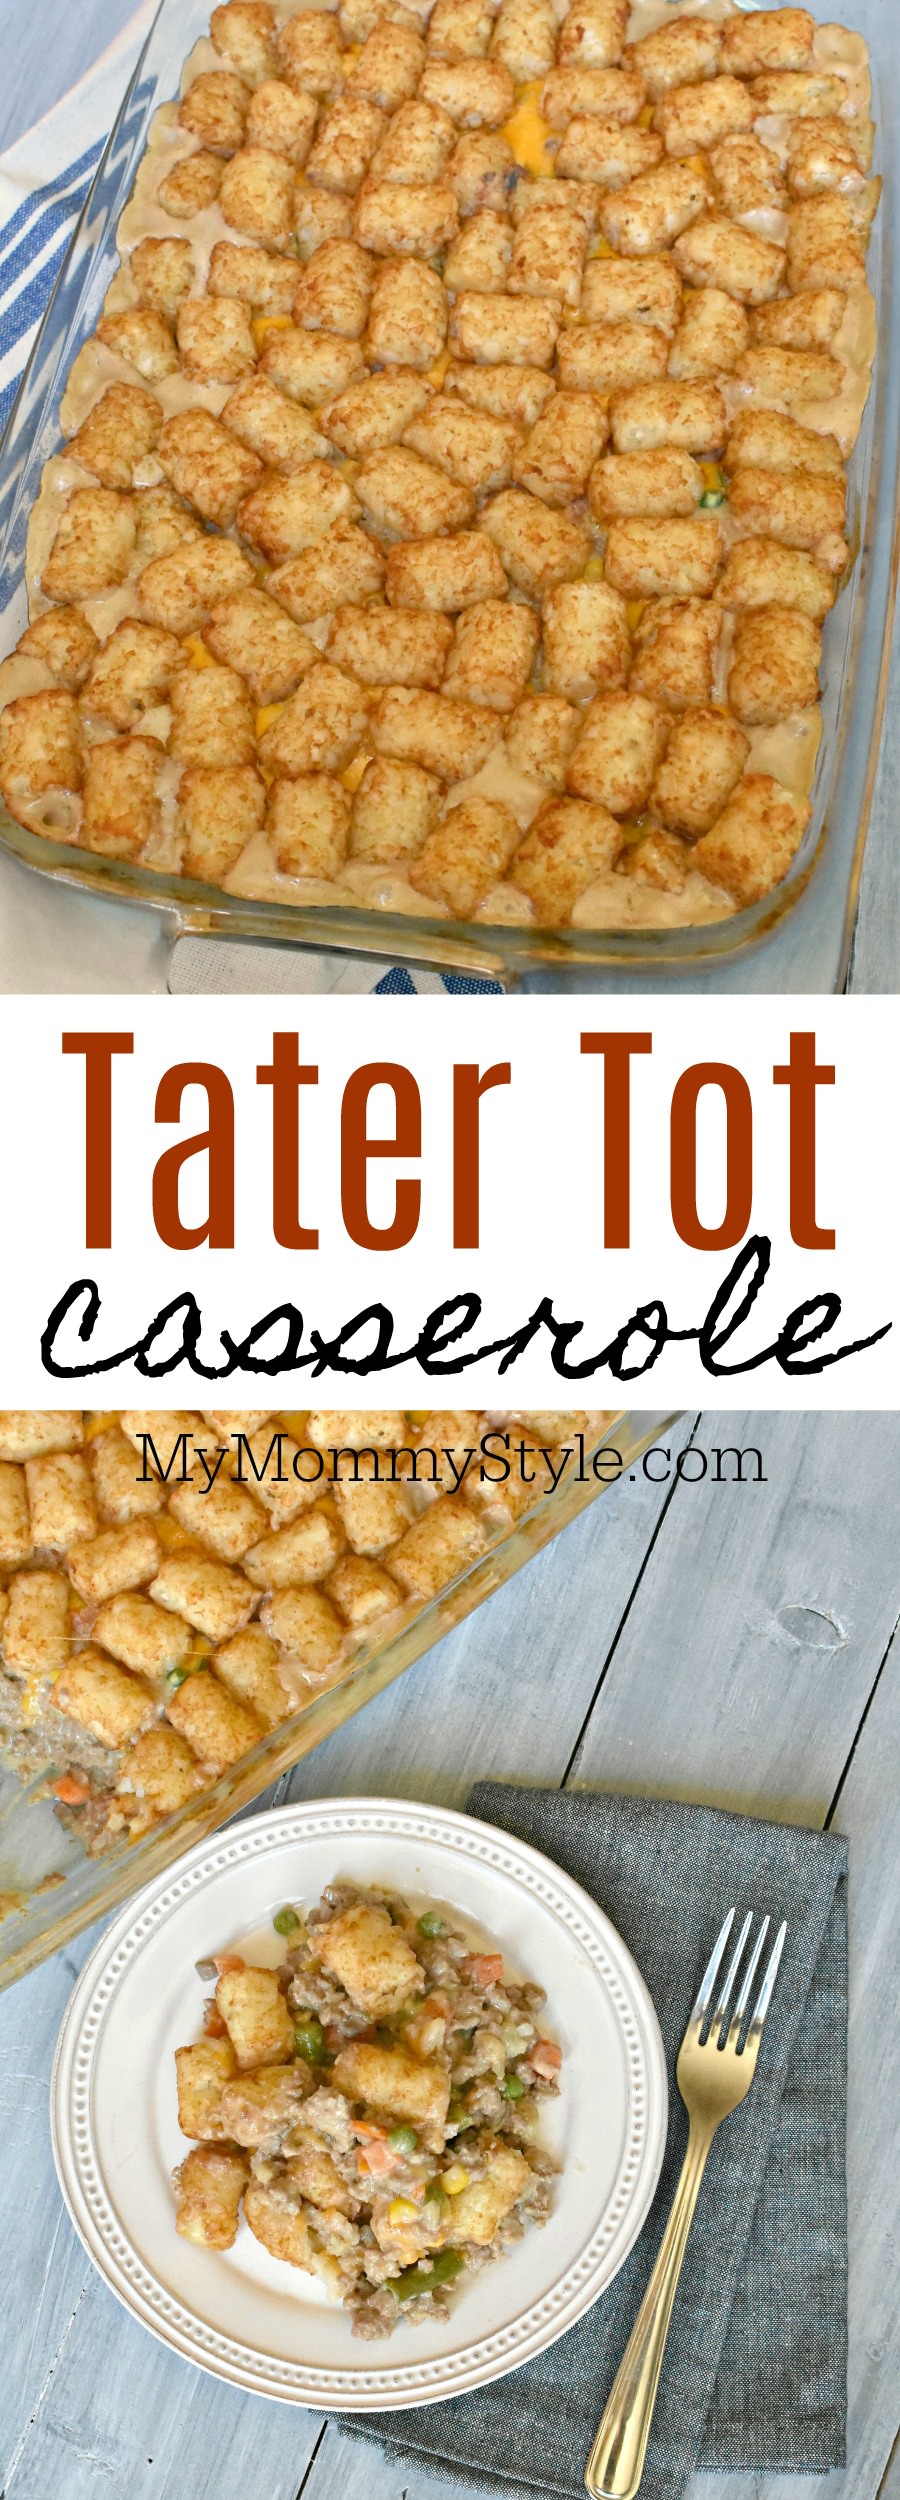 This easy and oh so cheesy tater tot casserole is a family favorite that is simple to make. Easily adjust this recipe to fit your family's style and taste. via @mymommystyle